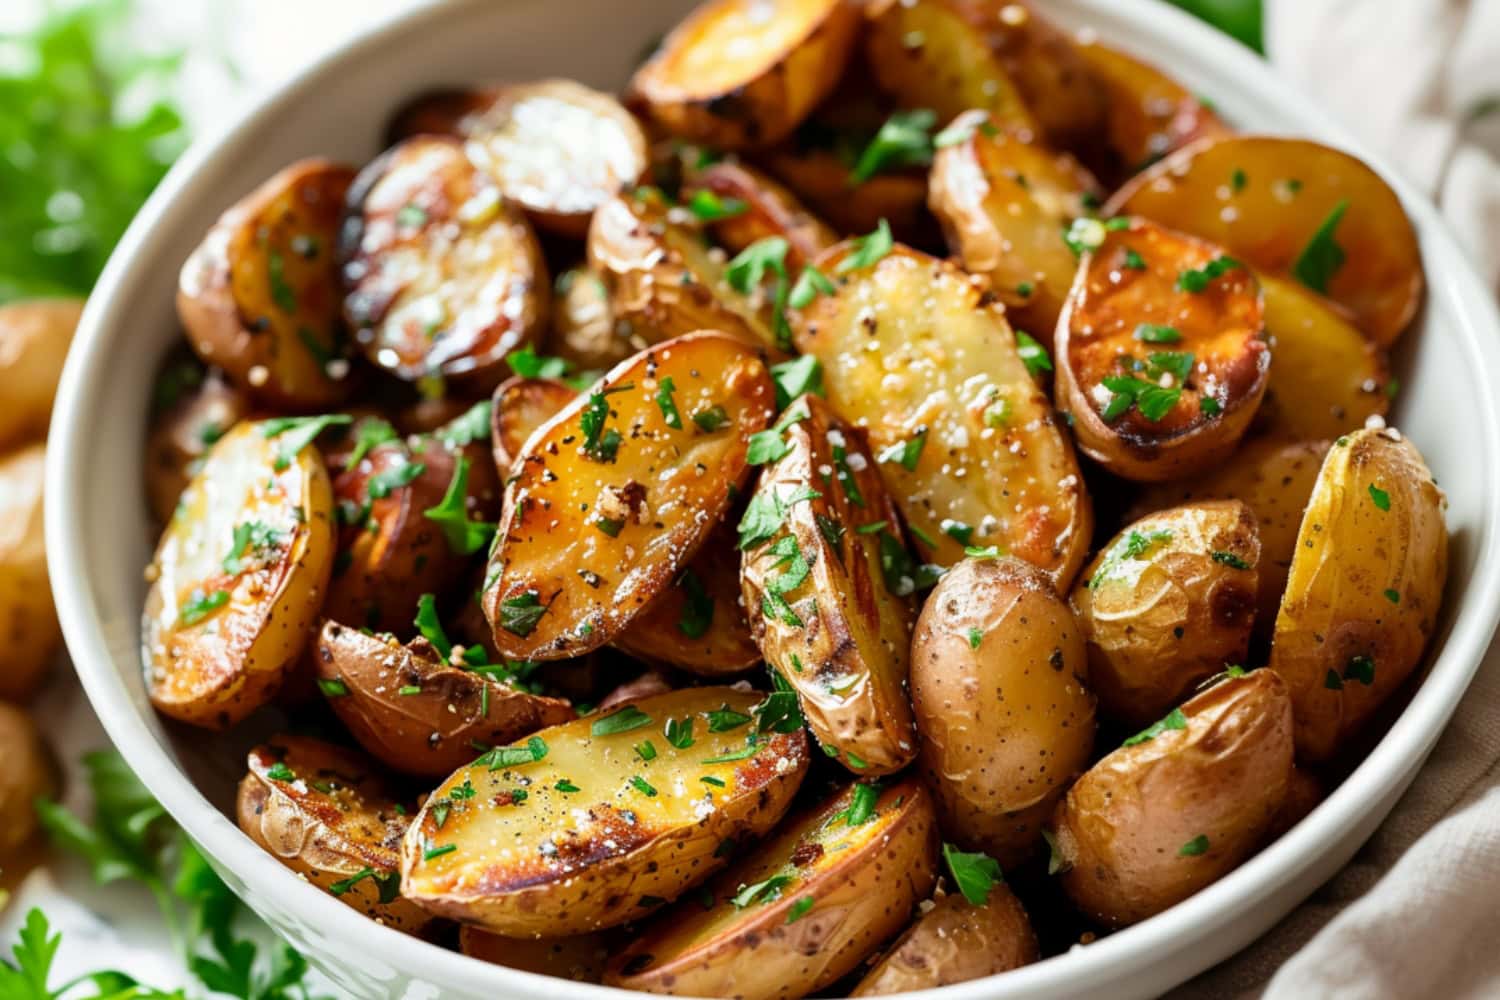 Roasted fingerling potatoes in a white bowl.